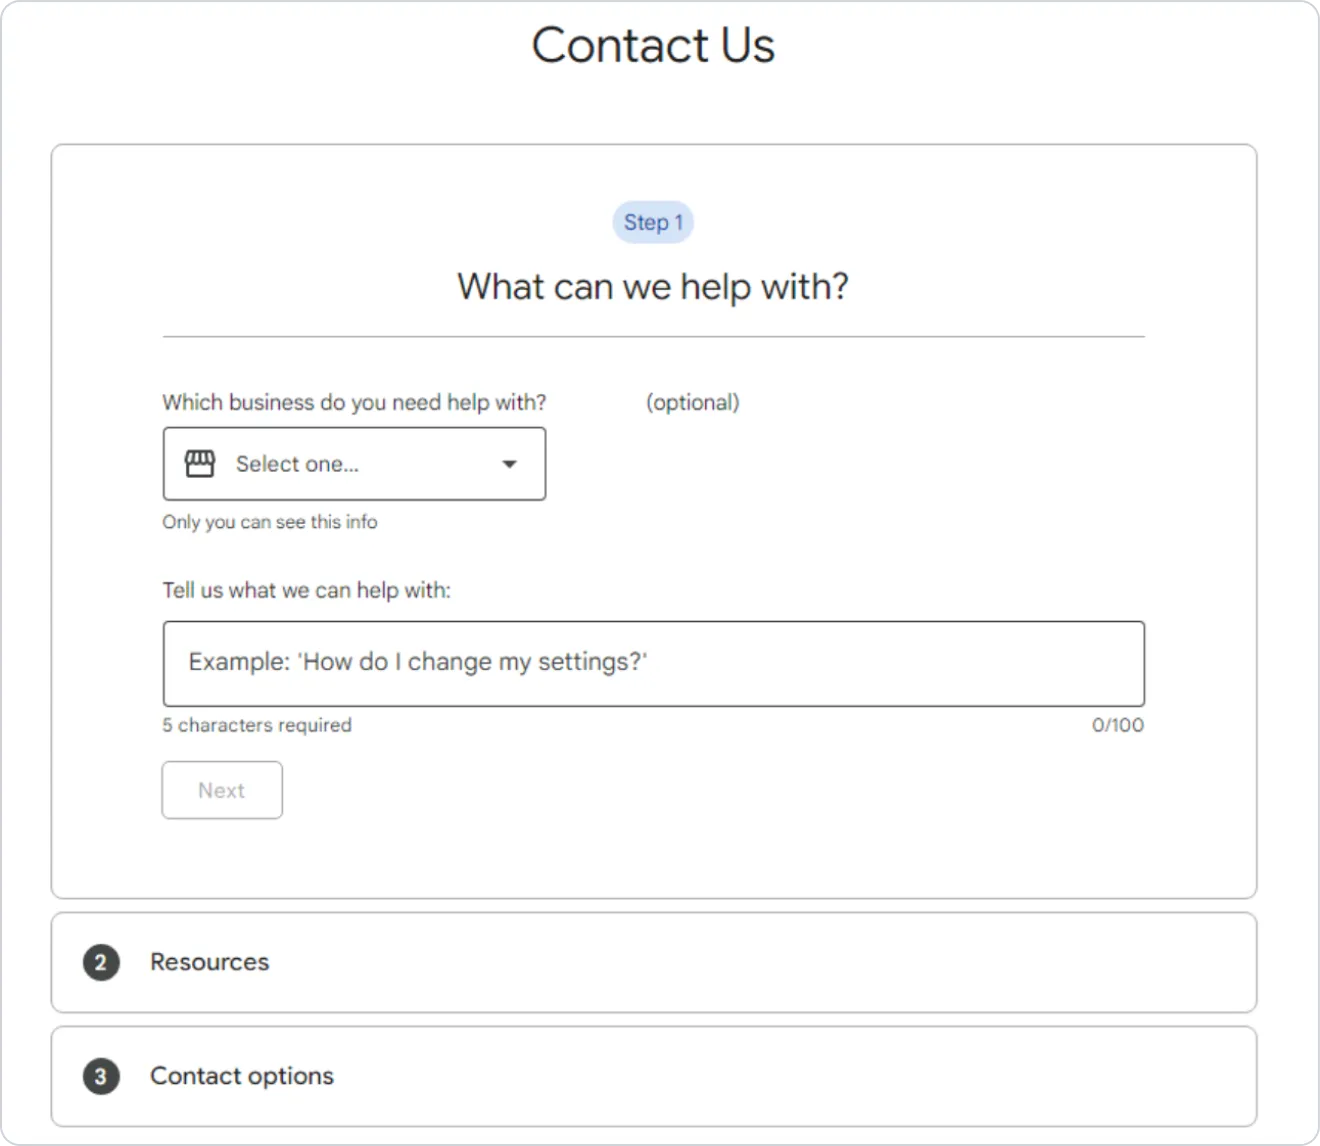 The contact form you need to use in order to merge Google Business Profile listings